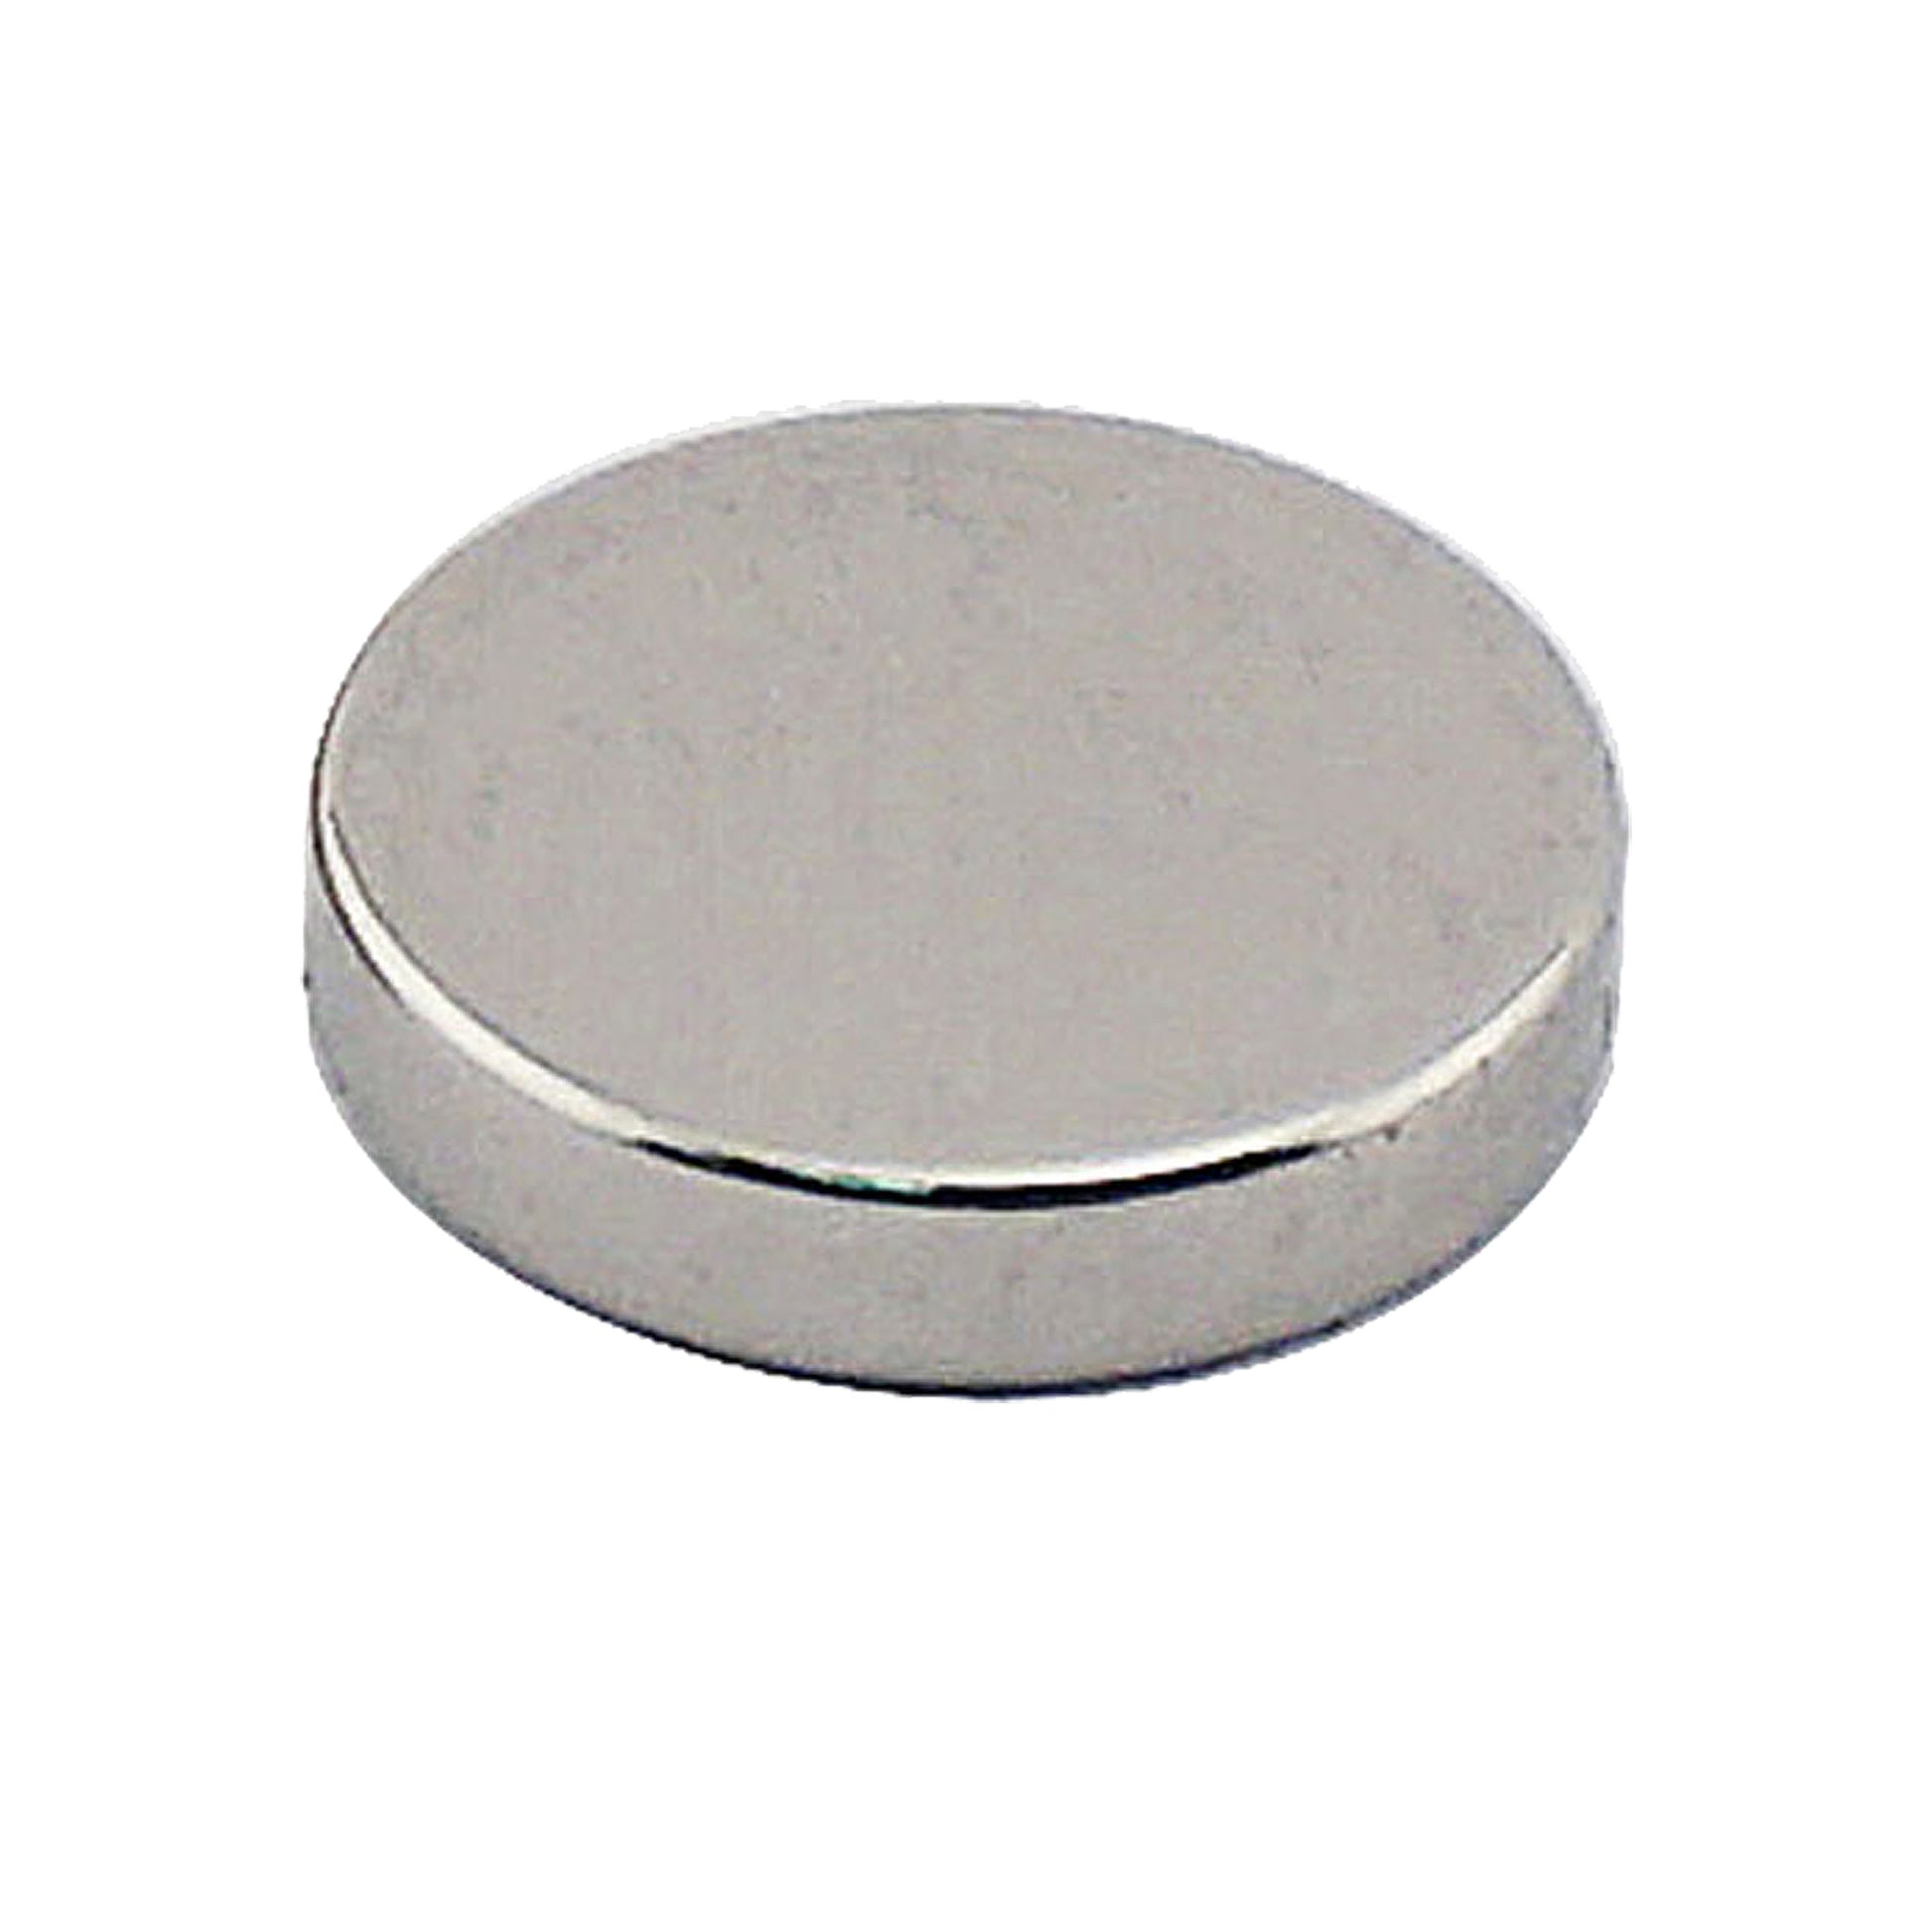 Load image into Gallery viewer, ND45-3607N Neodymium Disc Magnet - 45 Degree Angle View